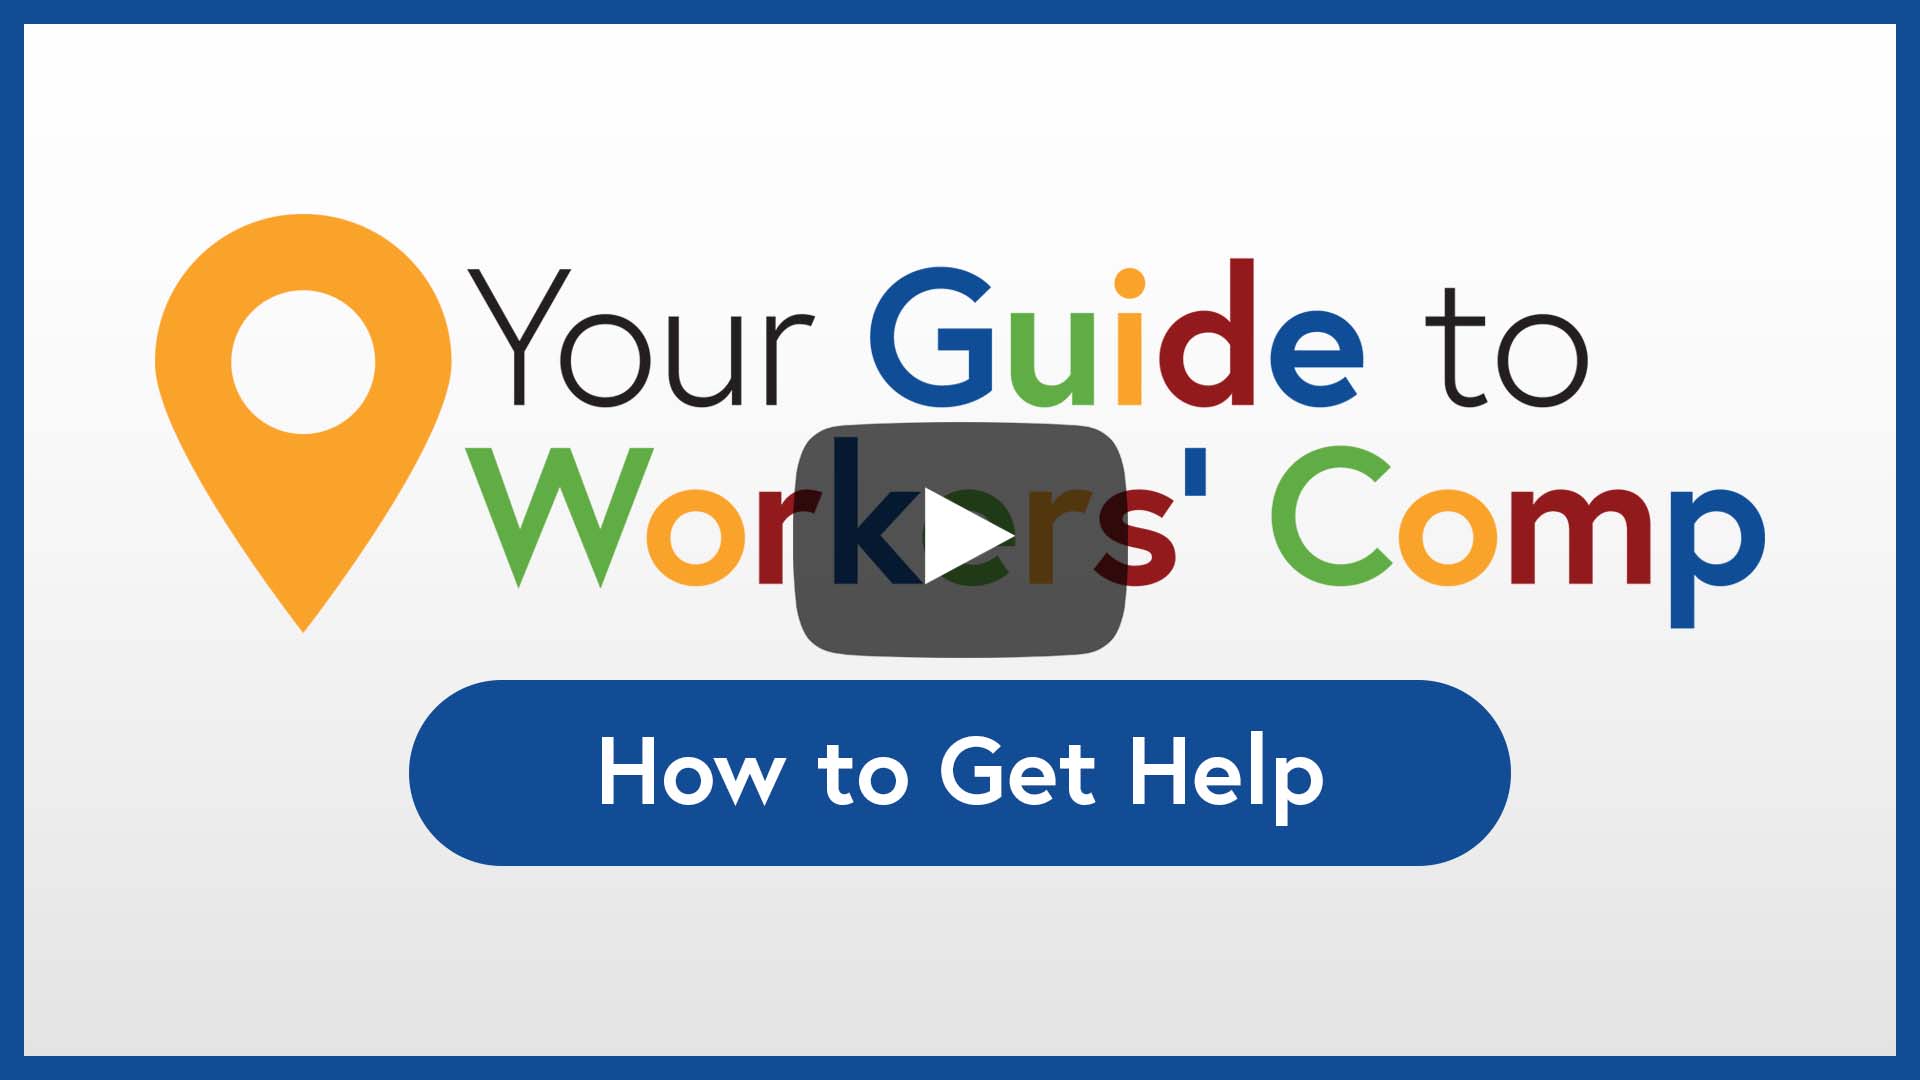 Your Guide to Workers' Comp - How to Get Help